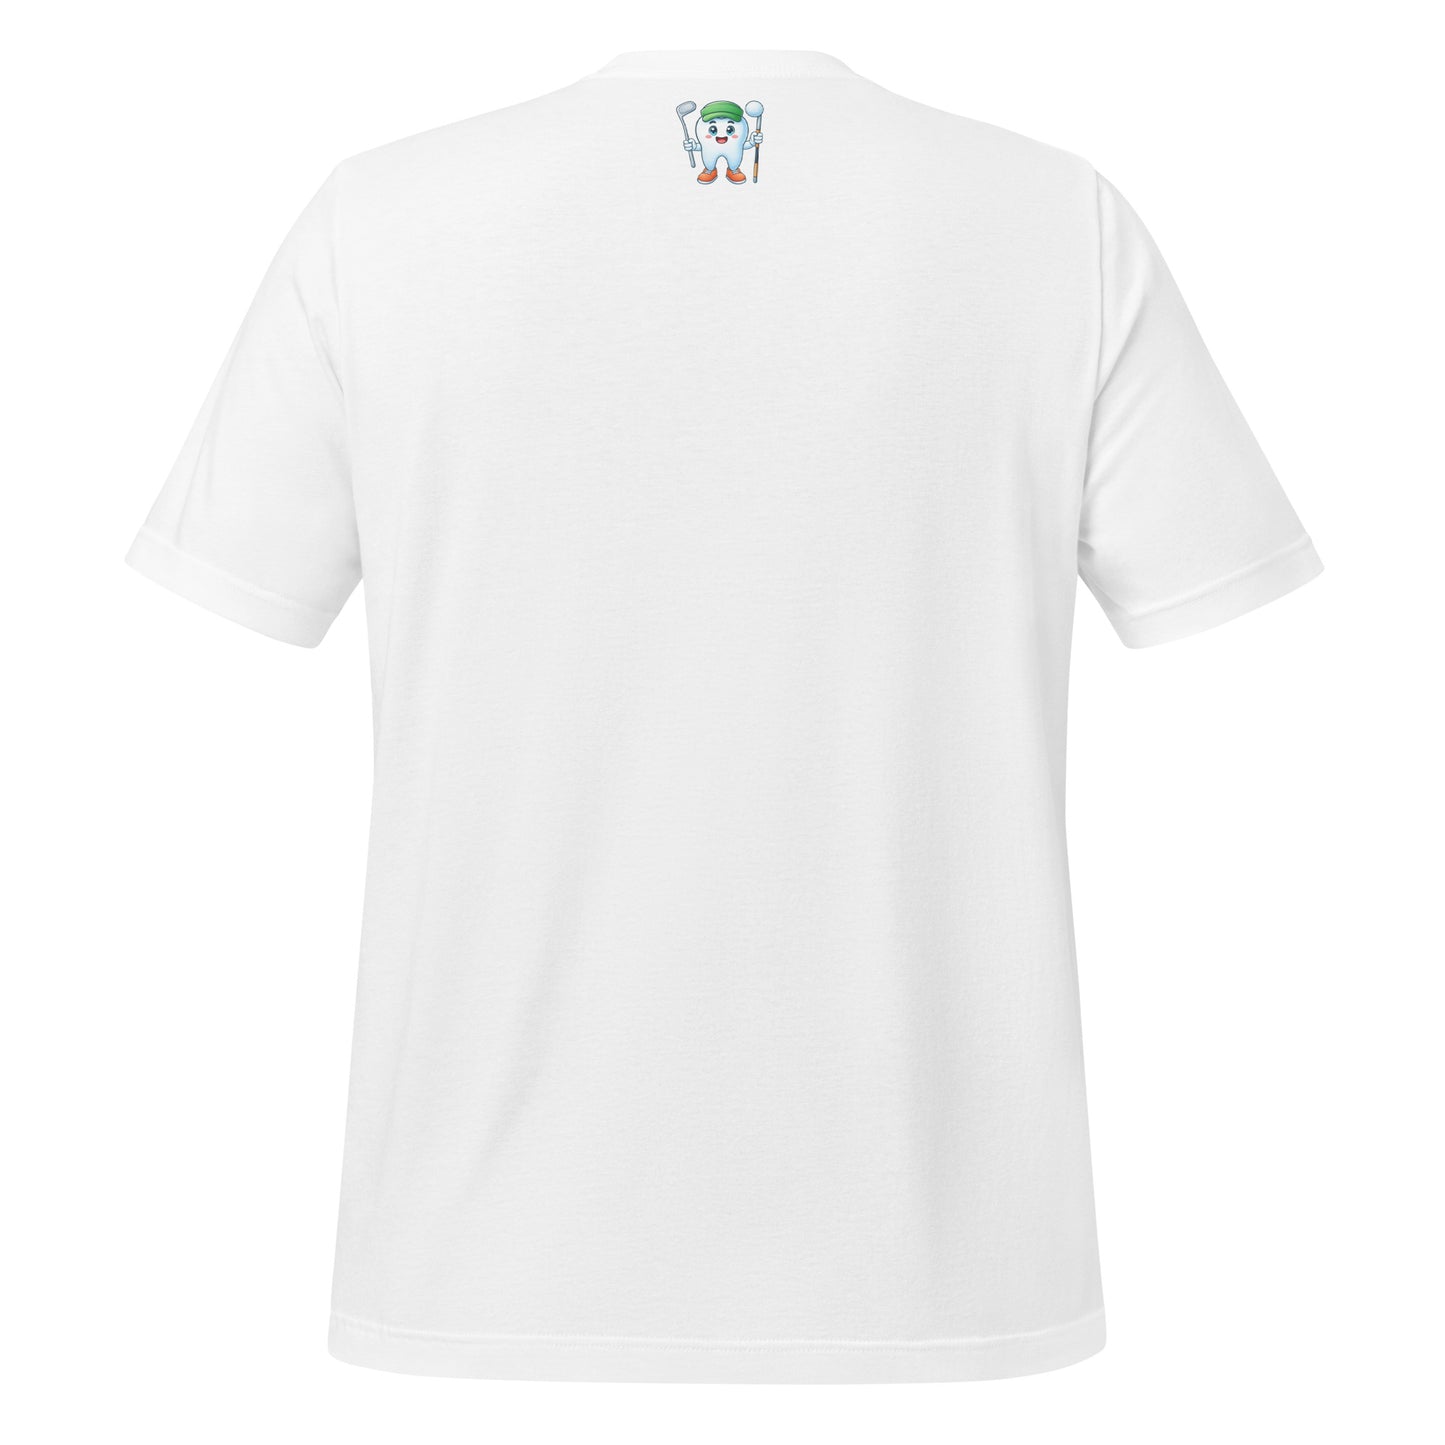 Cute dentist t-shirt showcasing an adorable tooth character in golf attire, joyfully celebrating a ‘hole in one’ achievement, perfect for dentist and dental professionals seeking unique and thematic dental apparel. White color back view.